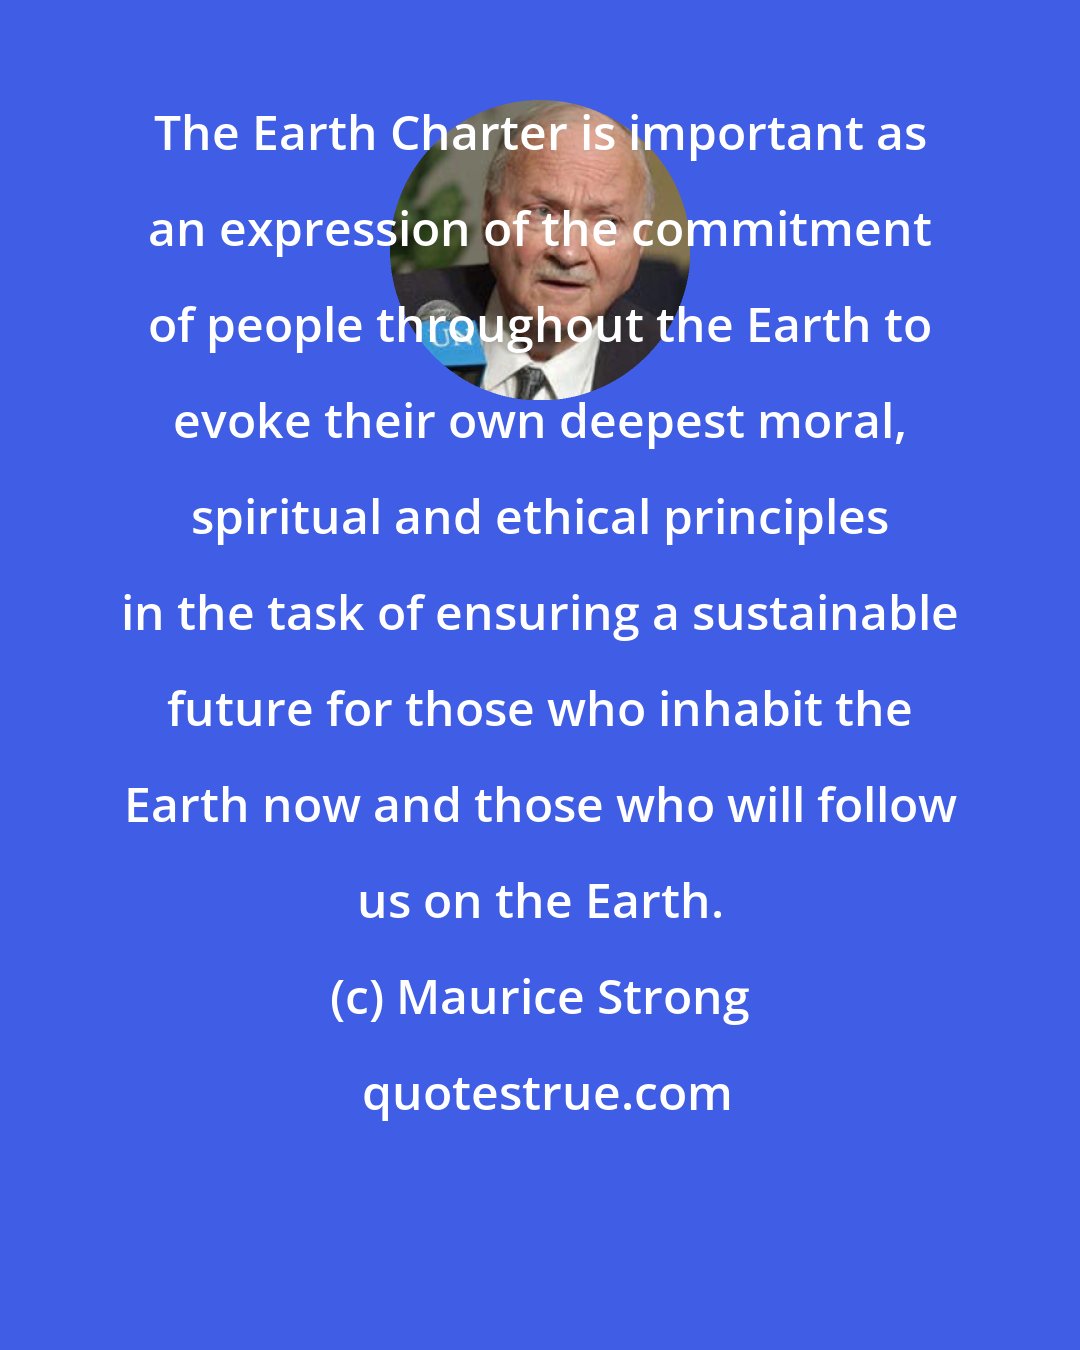 Maurice Strong: The Earth Charter is important as an expression of the commitment of people throughout the Earth to evoke their own deepest moral, spiritual and ethical principles in the task of ensuring a sustainable future for those who inhabit the Earth now and those who will follow us on the Earth.